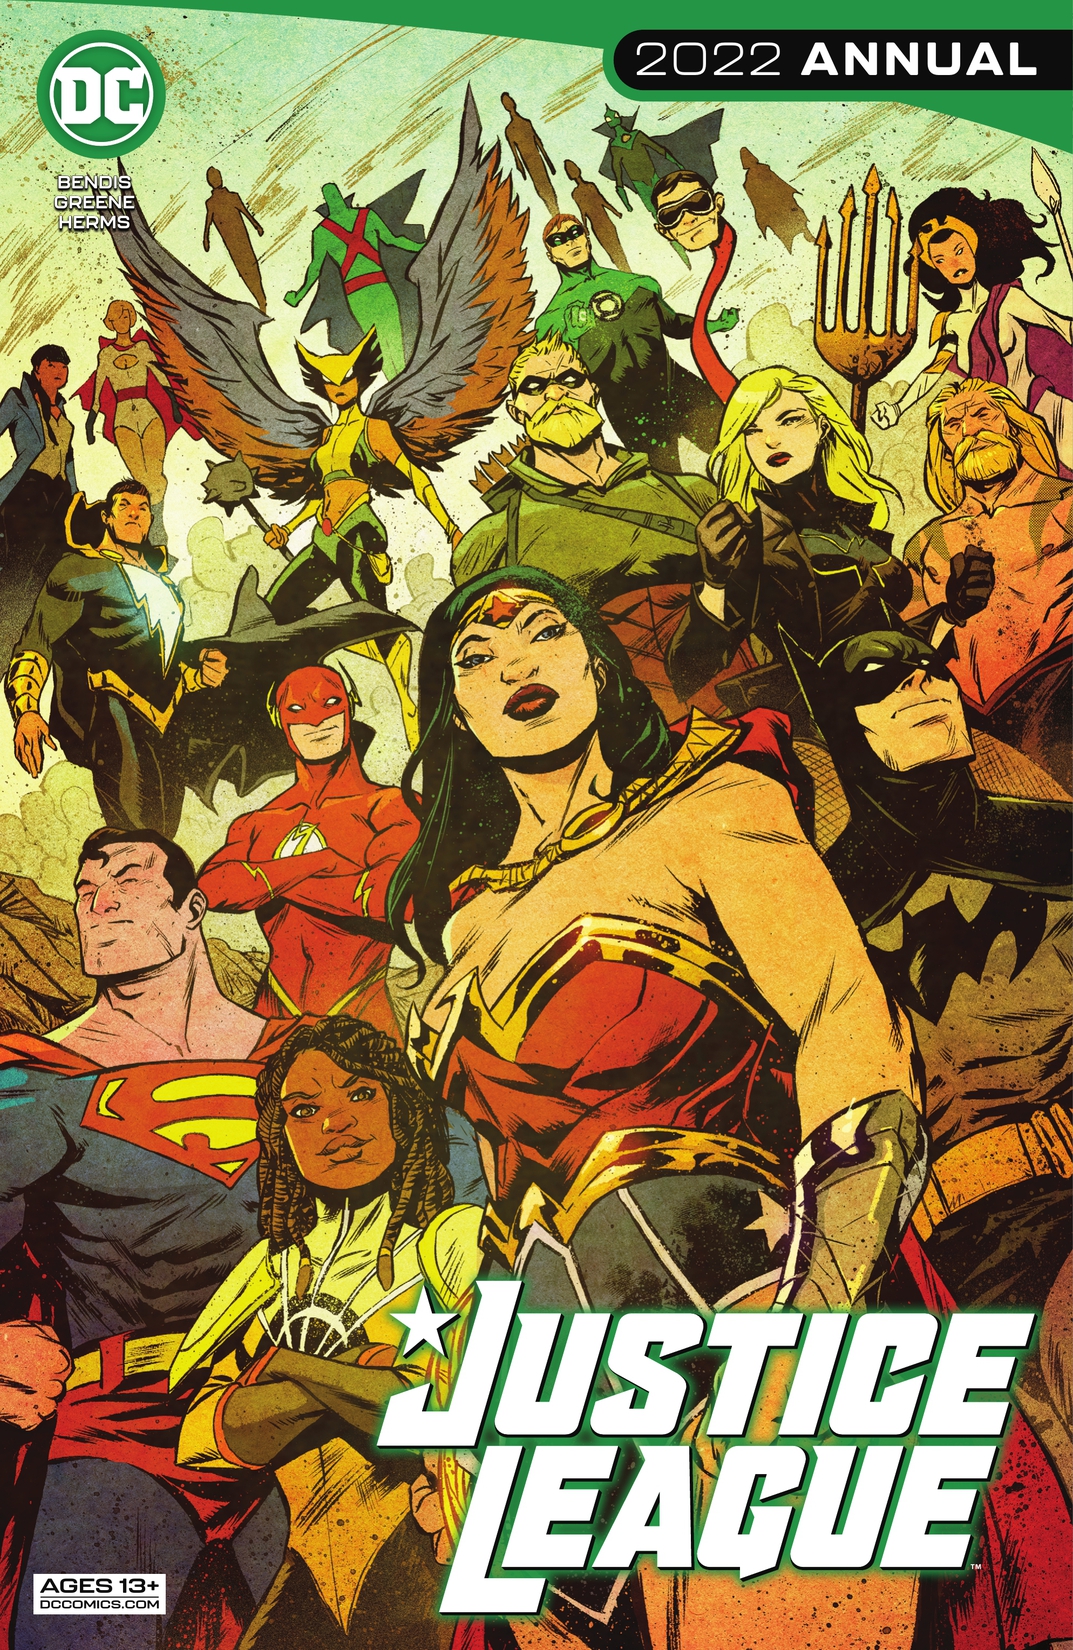 Justice League 2021 Annual #1 preview images